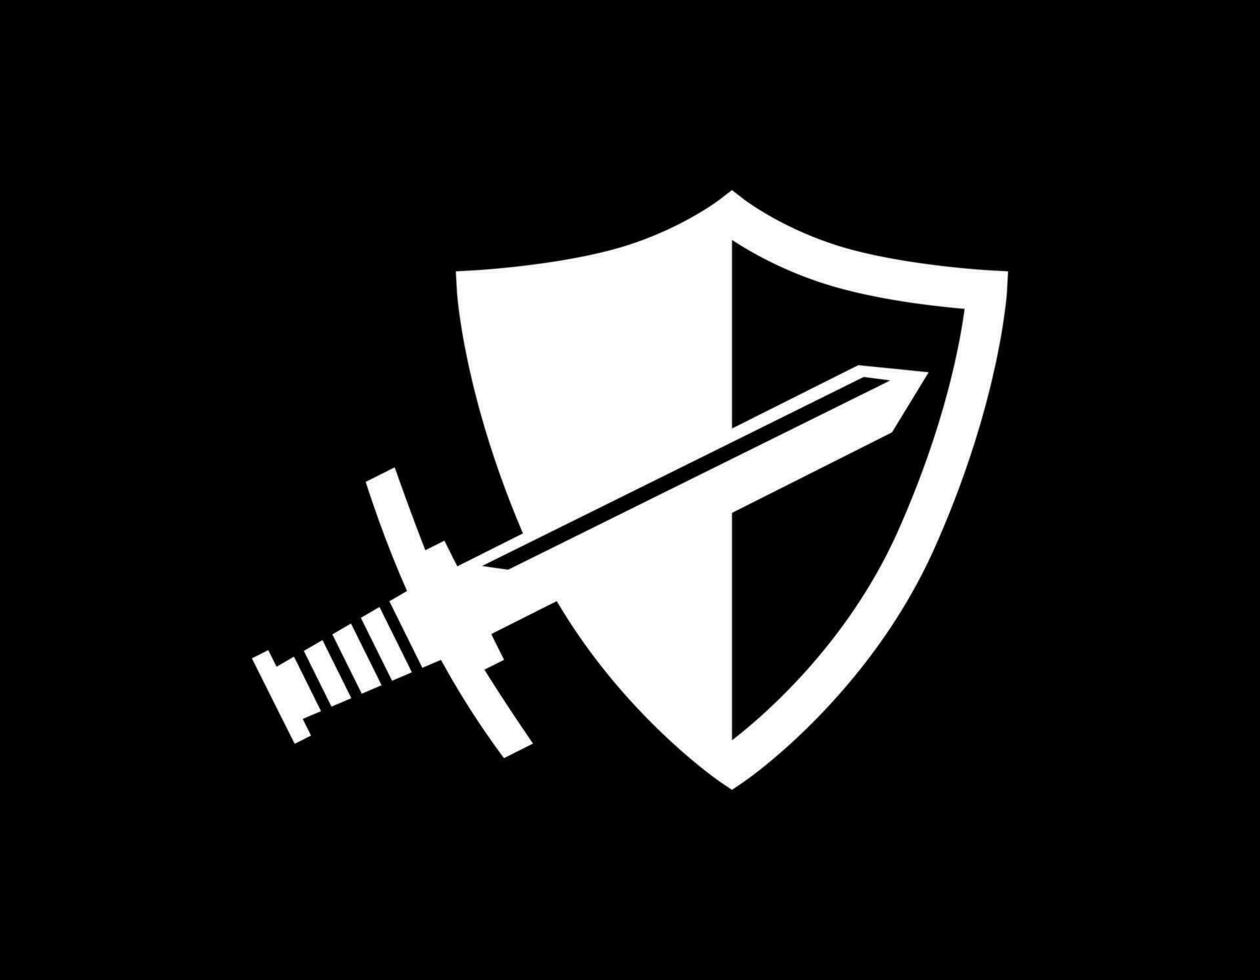 Single sword and shield emblem with black. Minimal luxury symbol of weapon or battle. Vector illustration of sword with protection concept.